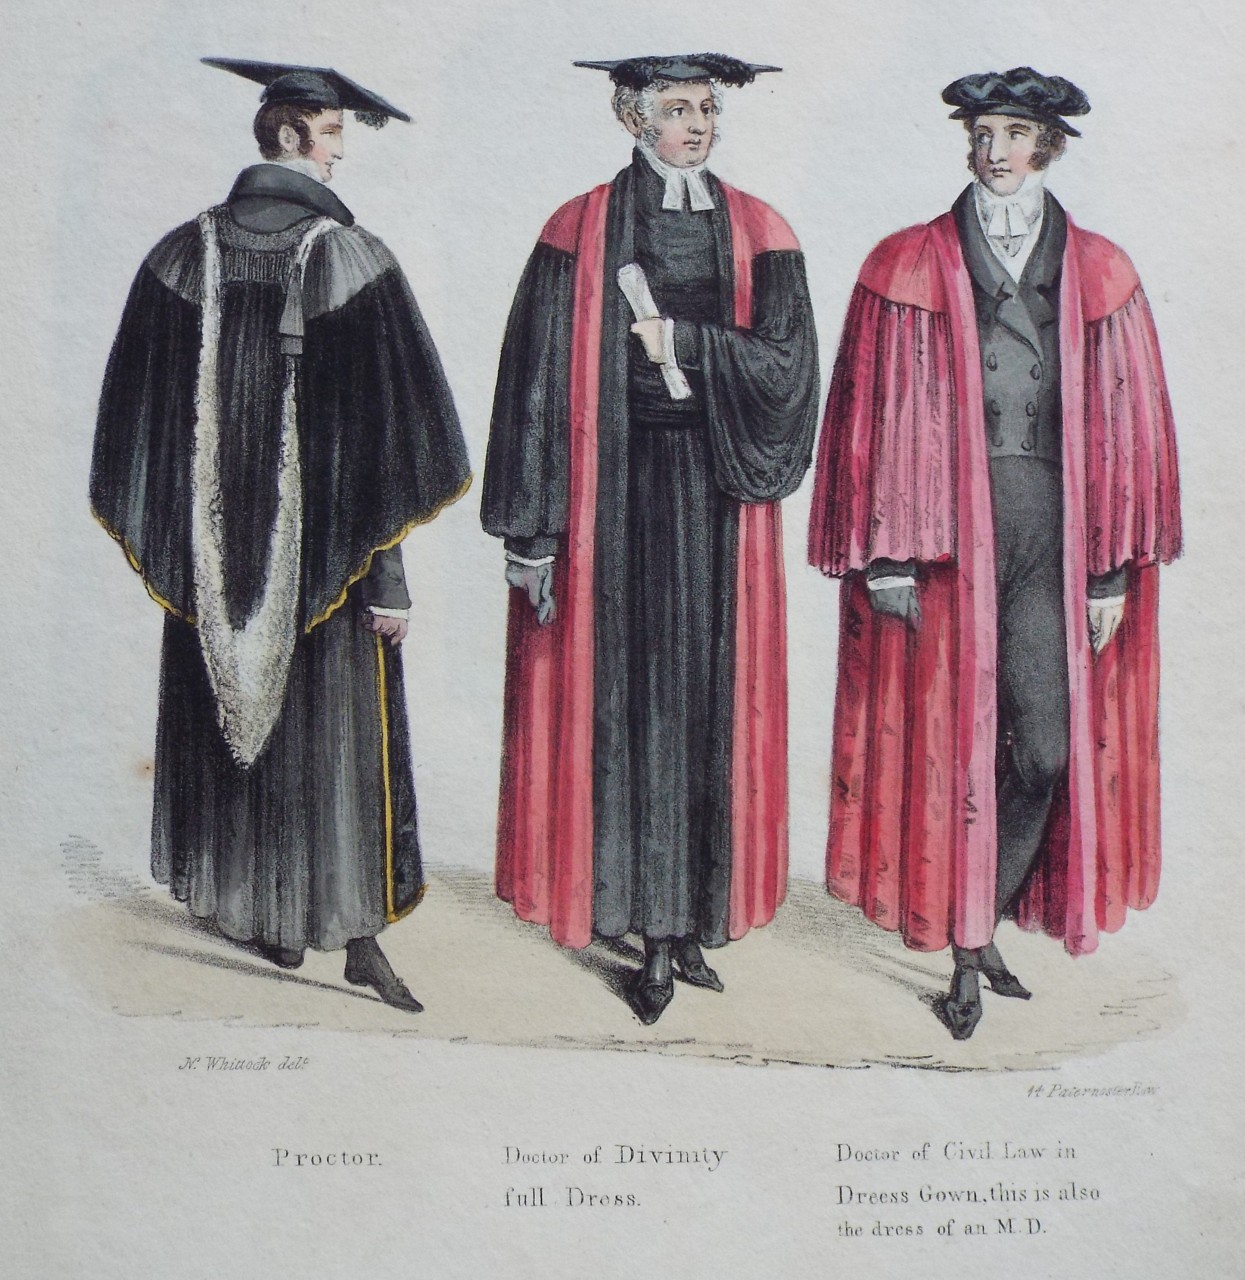 Lithograph - Proctor. Doctor of Divinity Full Dress. Doctor of Civil Law in Dress Gown, this is also the dress of an M. D.